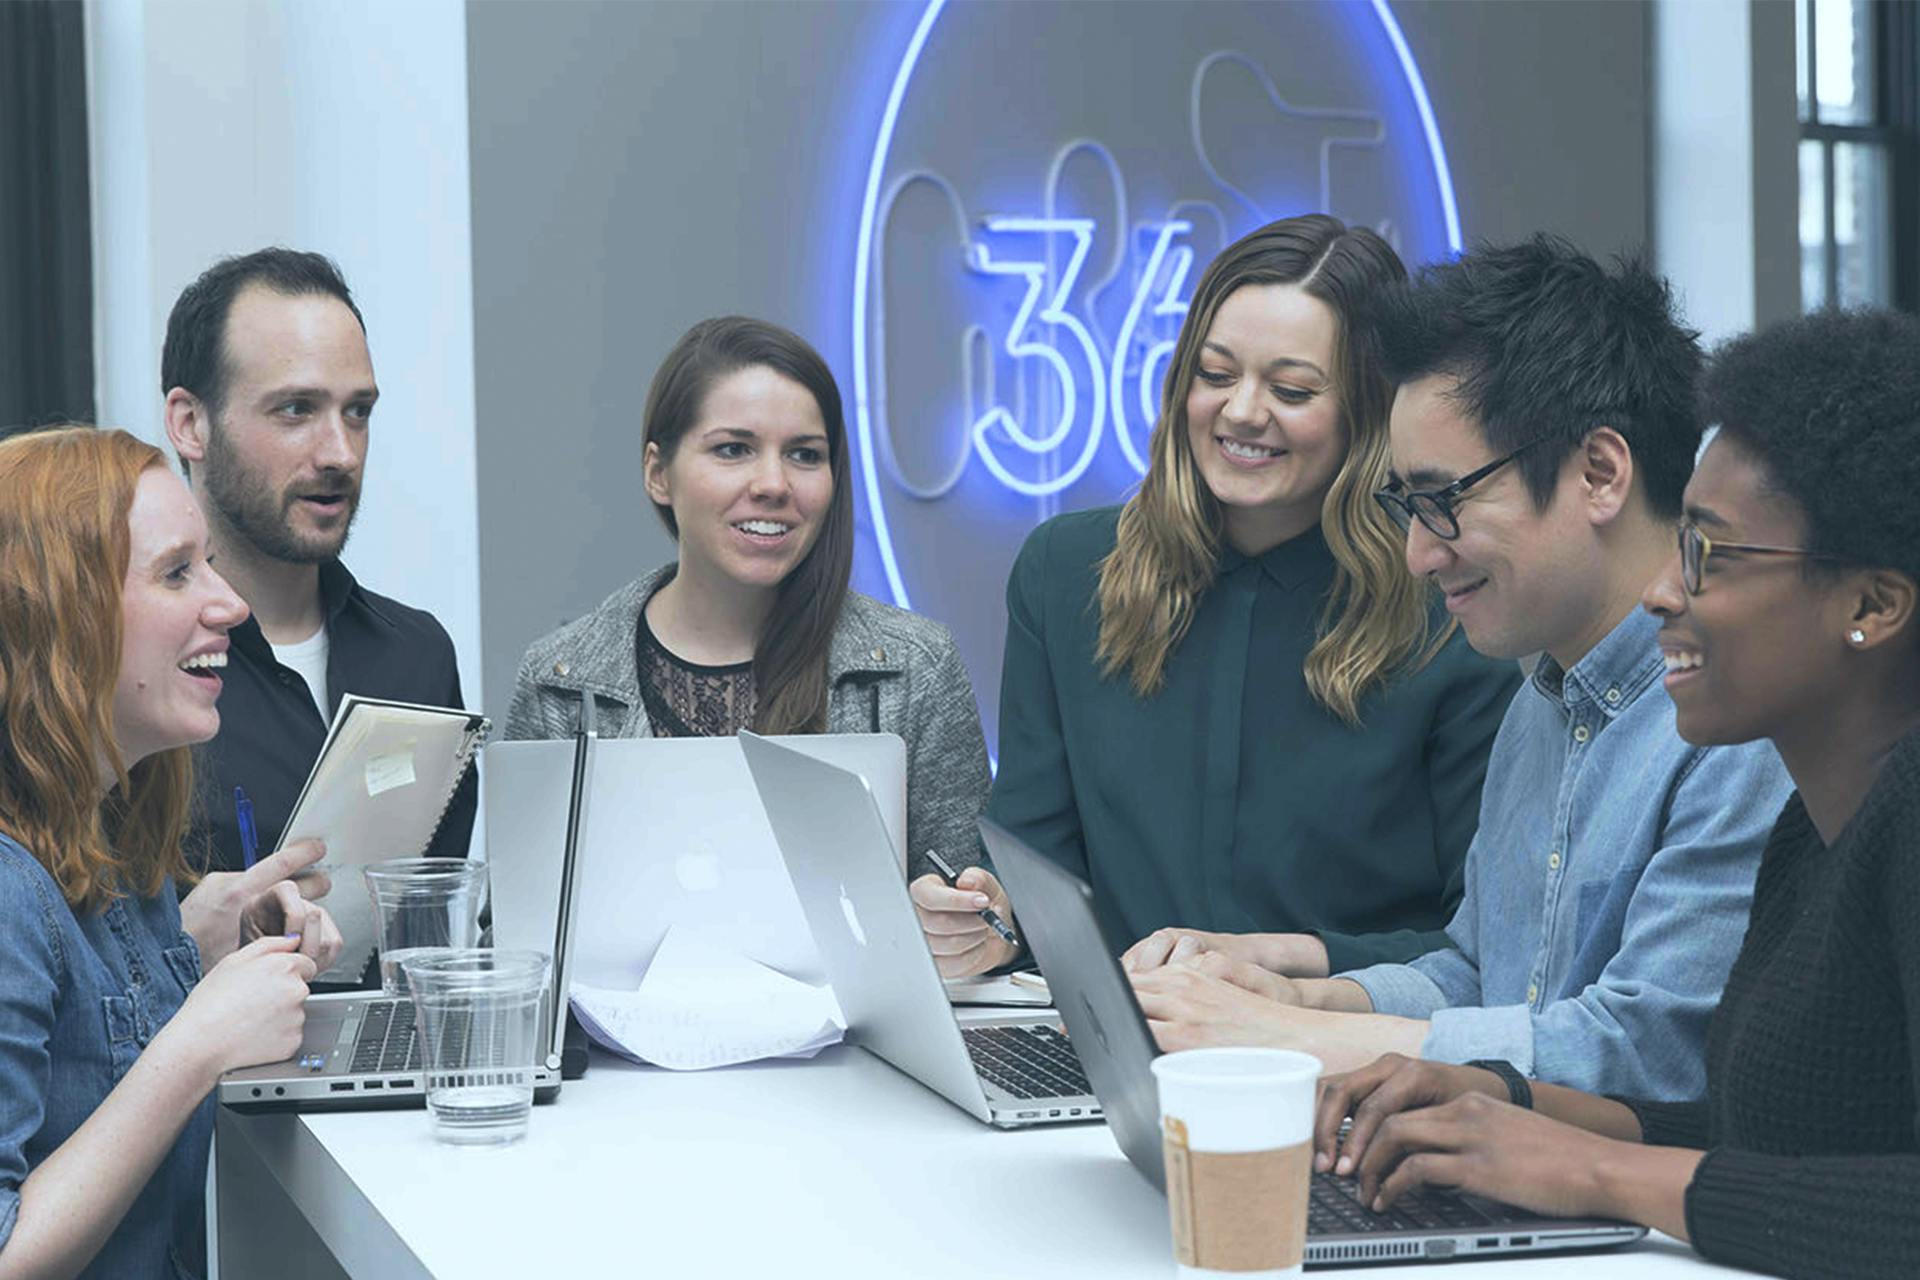 Group of people having a team meeting against the 360i logo